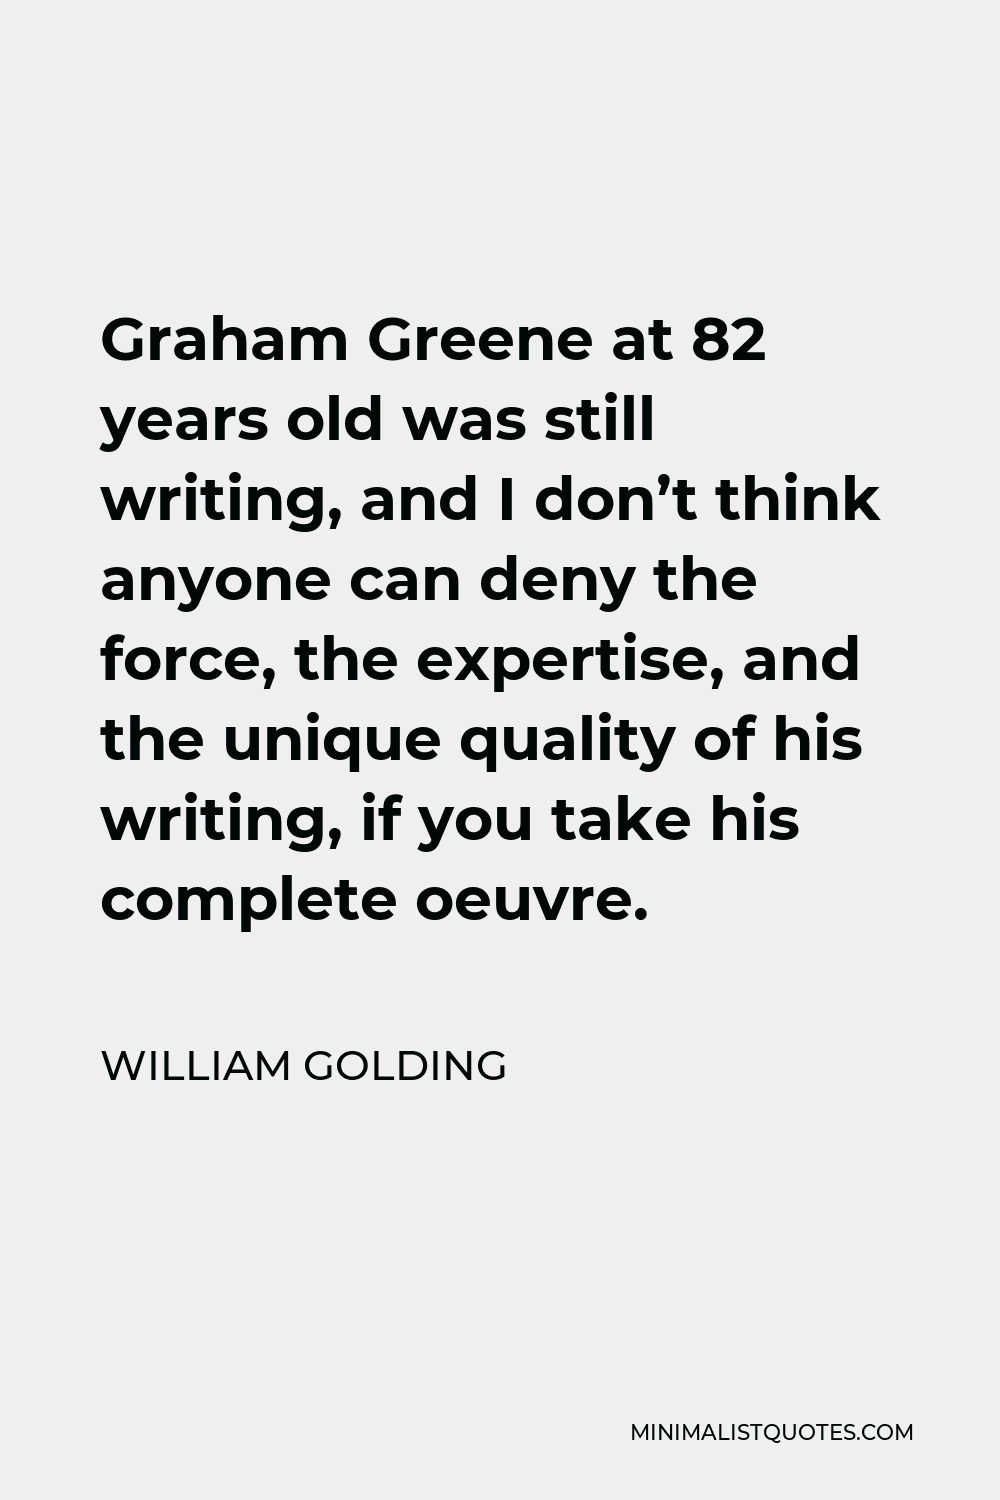 William Golding Quote - Graham Greene at 82 years old was still writing, and I don’t think anyone can deny the force, the expertise, and the unique quality of his writing, if you take his complete oeuvre.